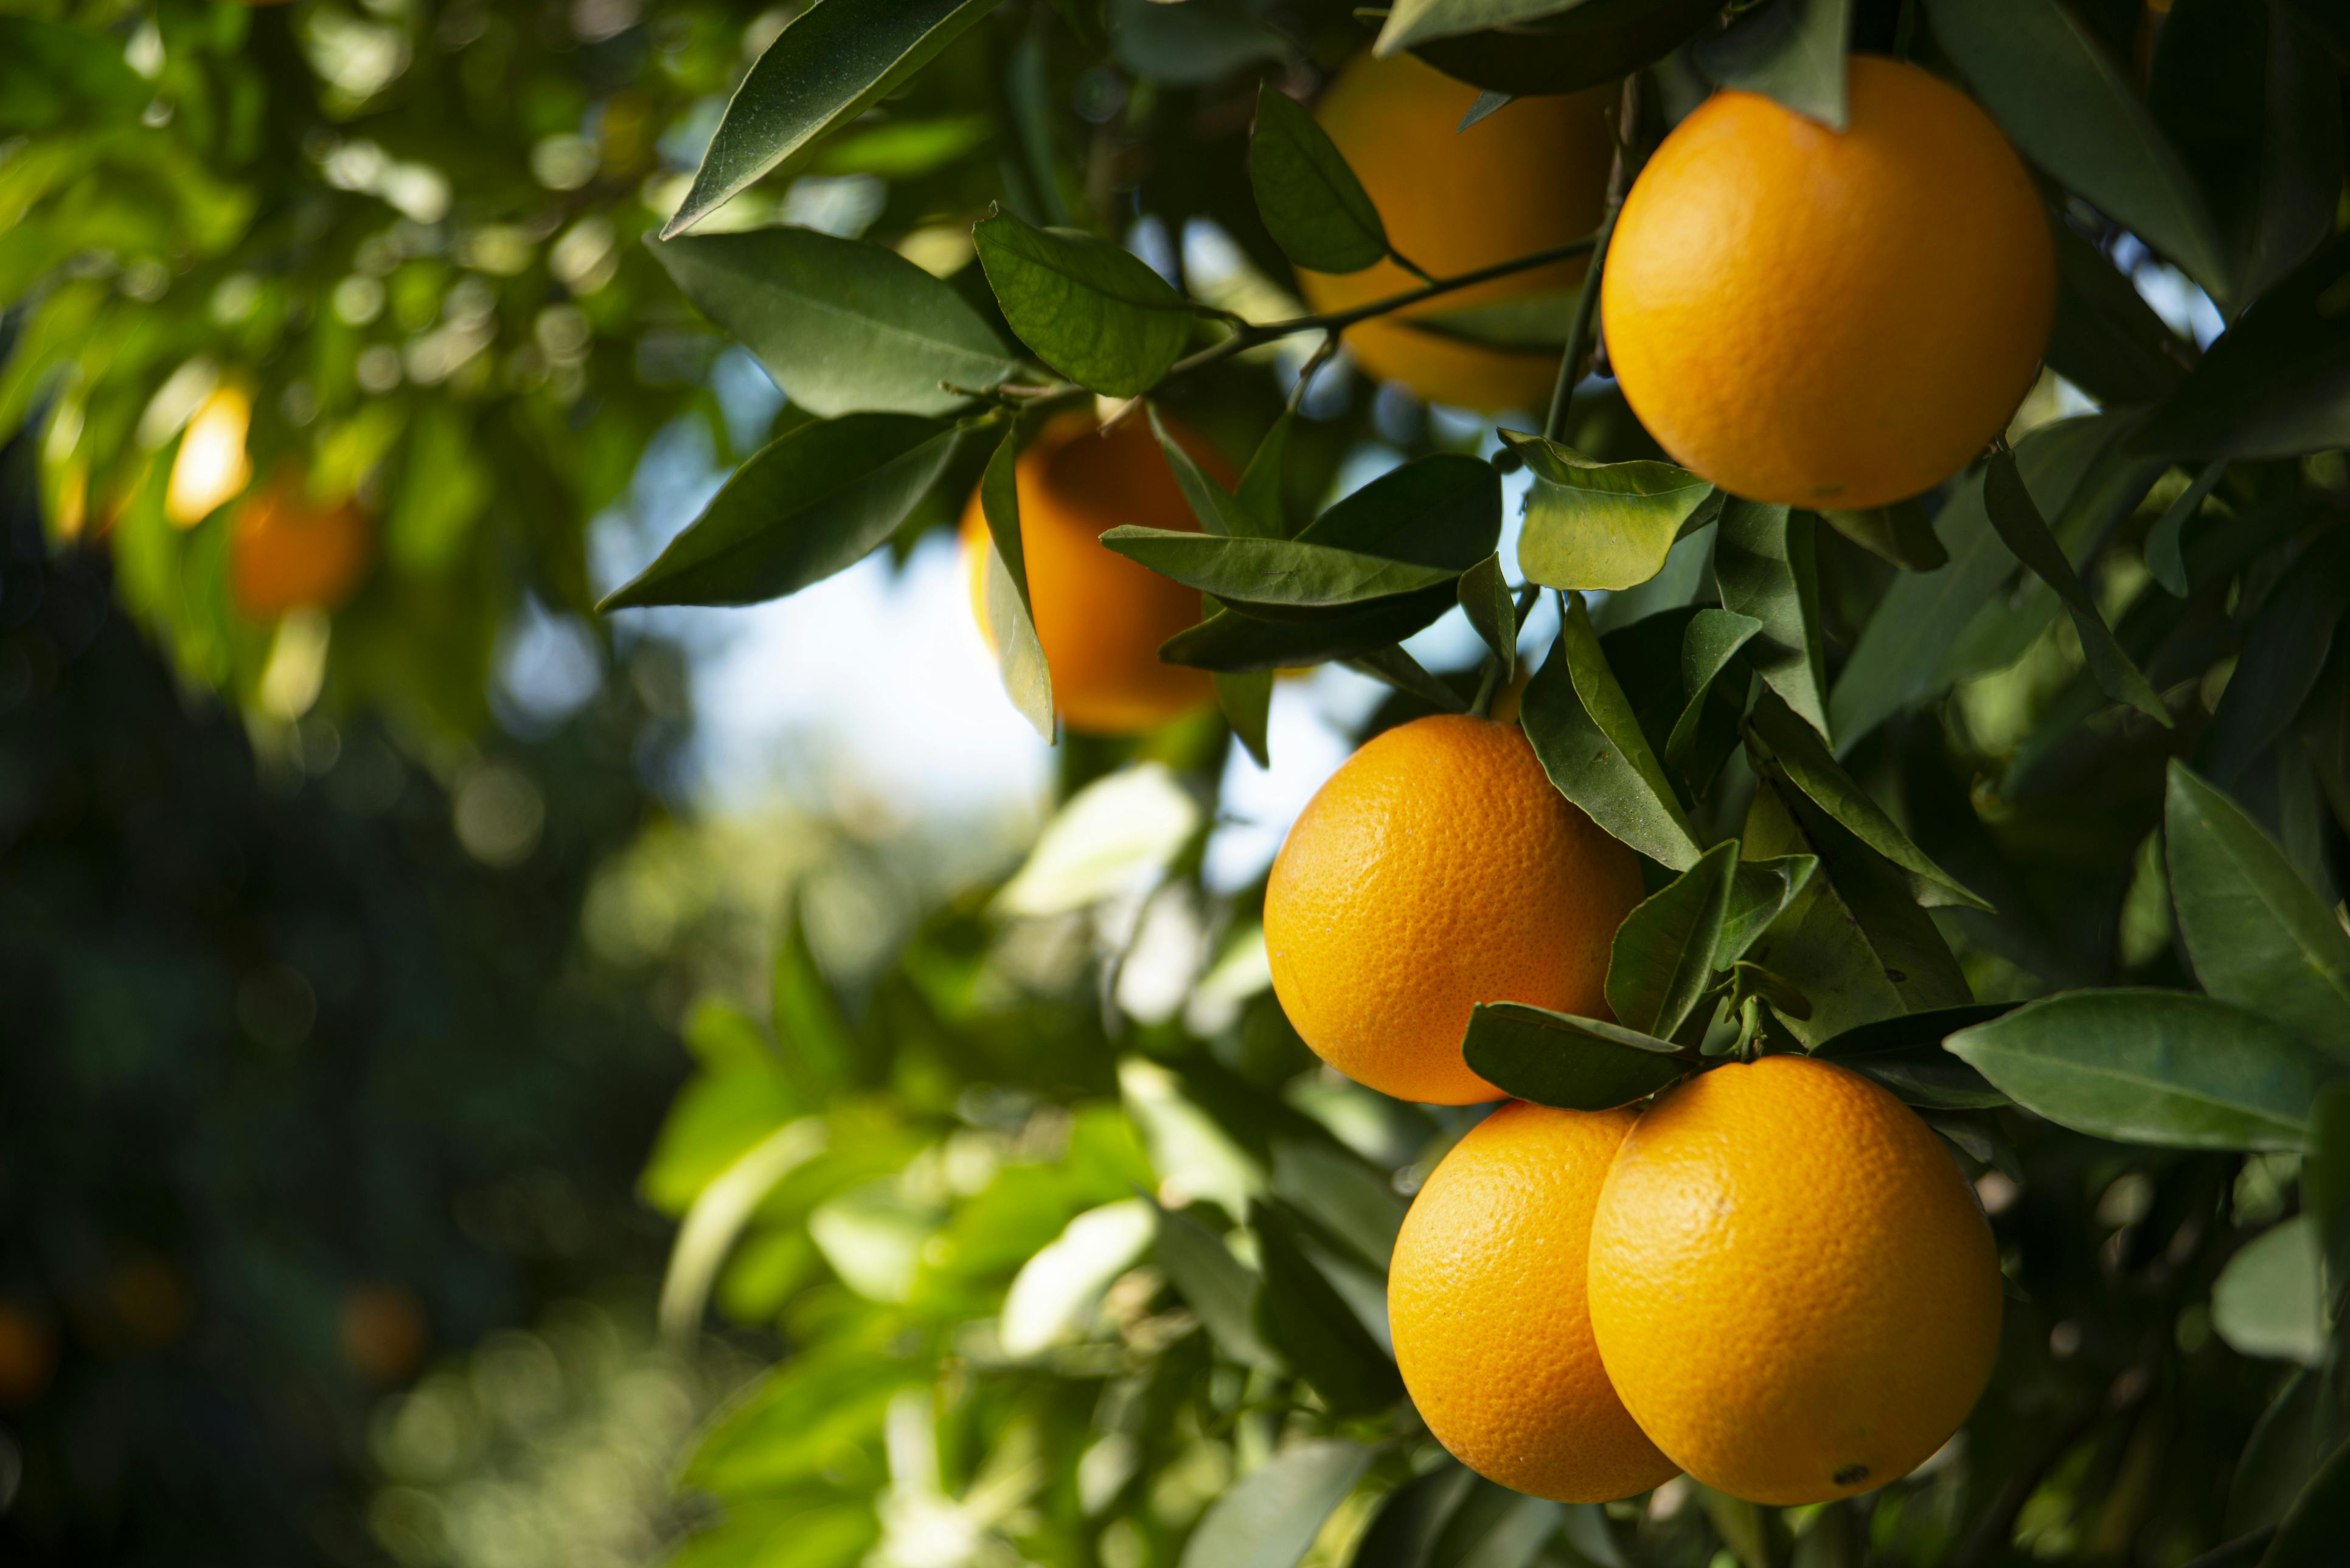 Close-up of oranges on the tree in an orange grove.